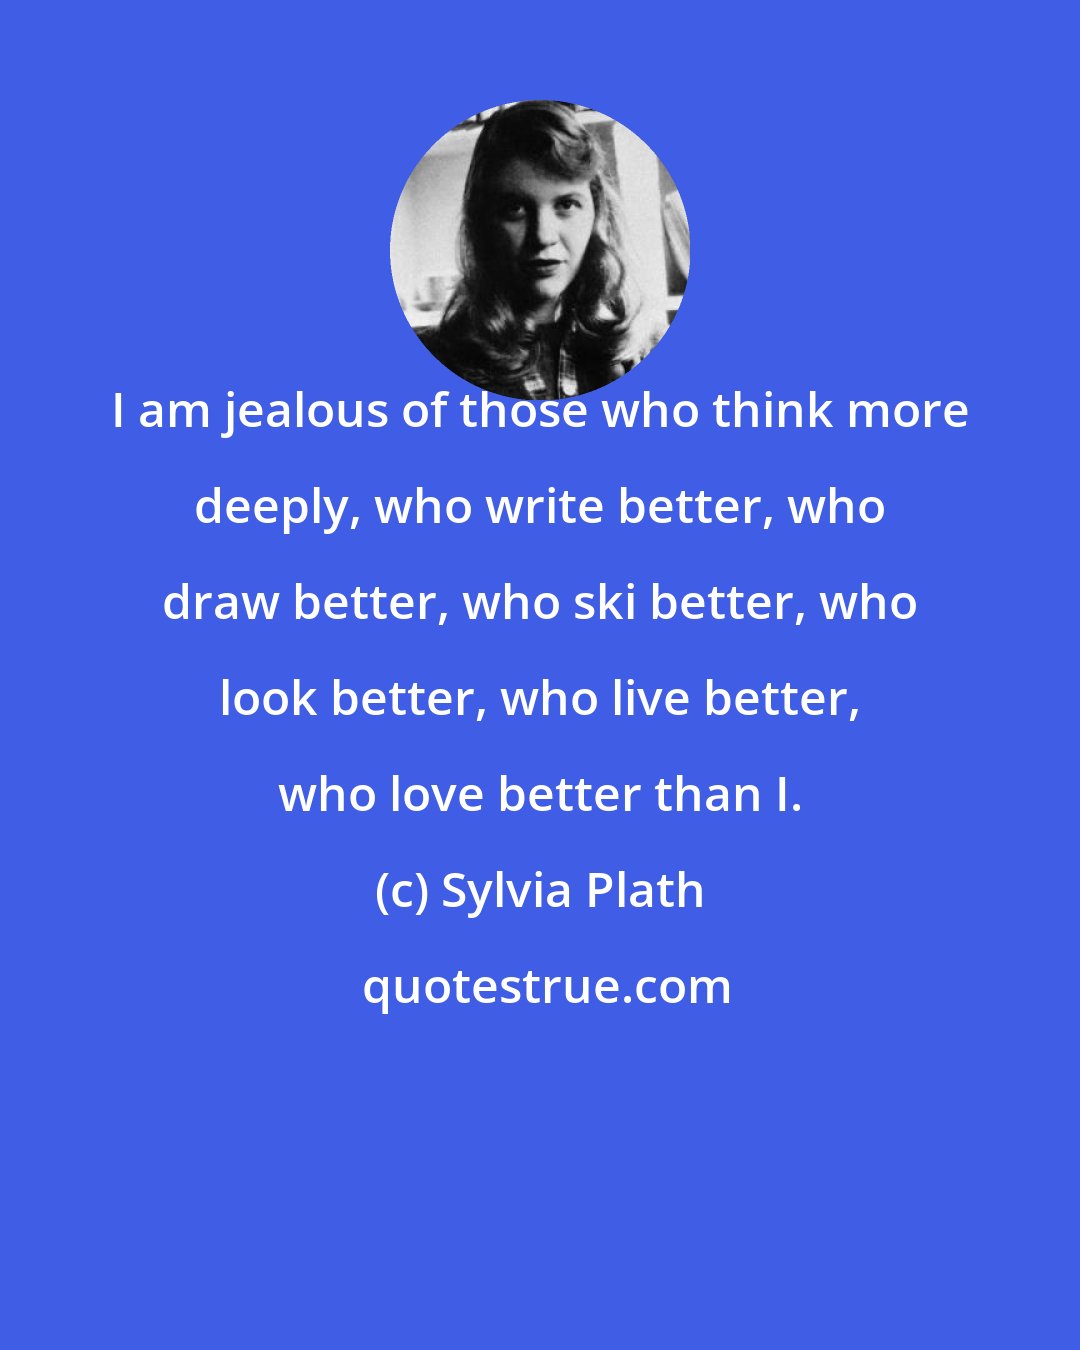 Sylvia Plath: I am jealous of those who think more deeply, who write better, who draw better, who ski better, who look better, who live better, who love better than I.